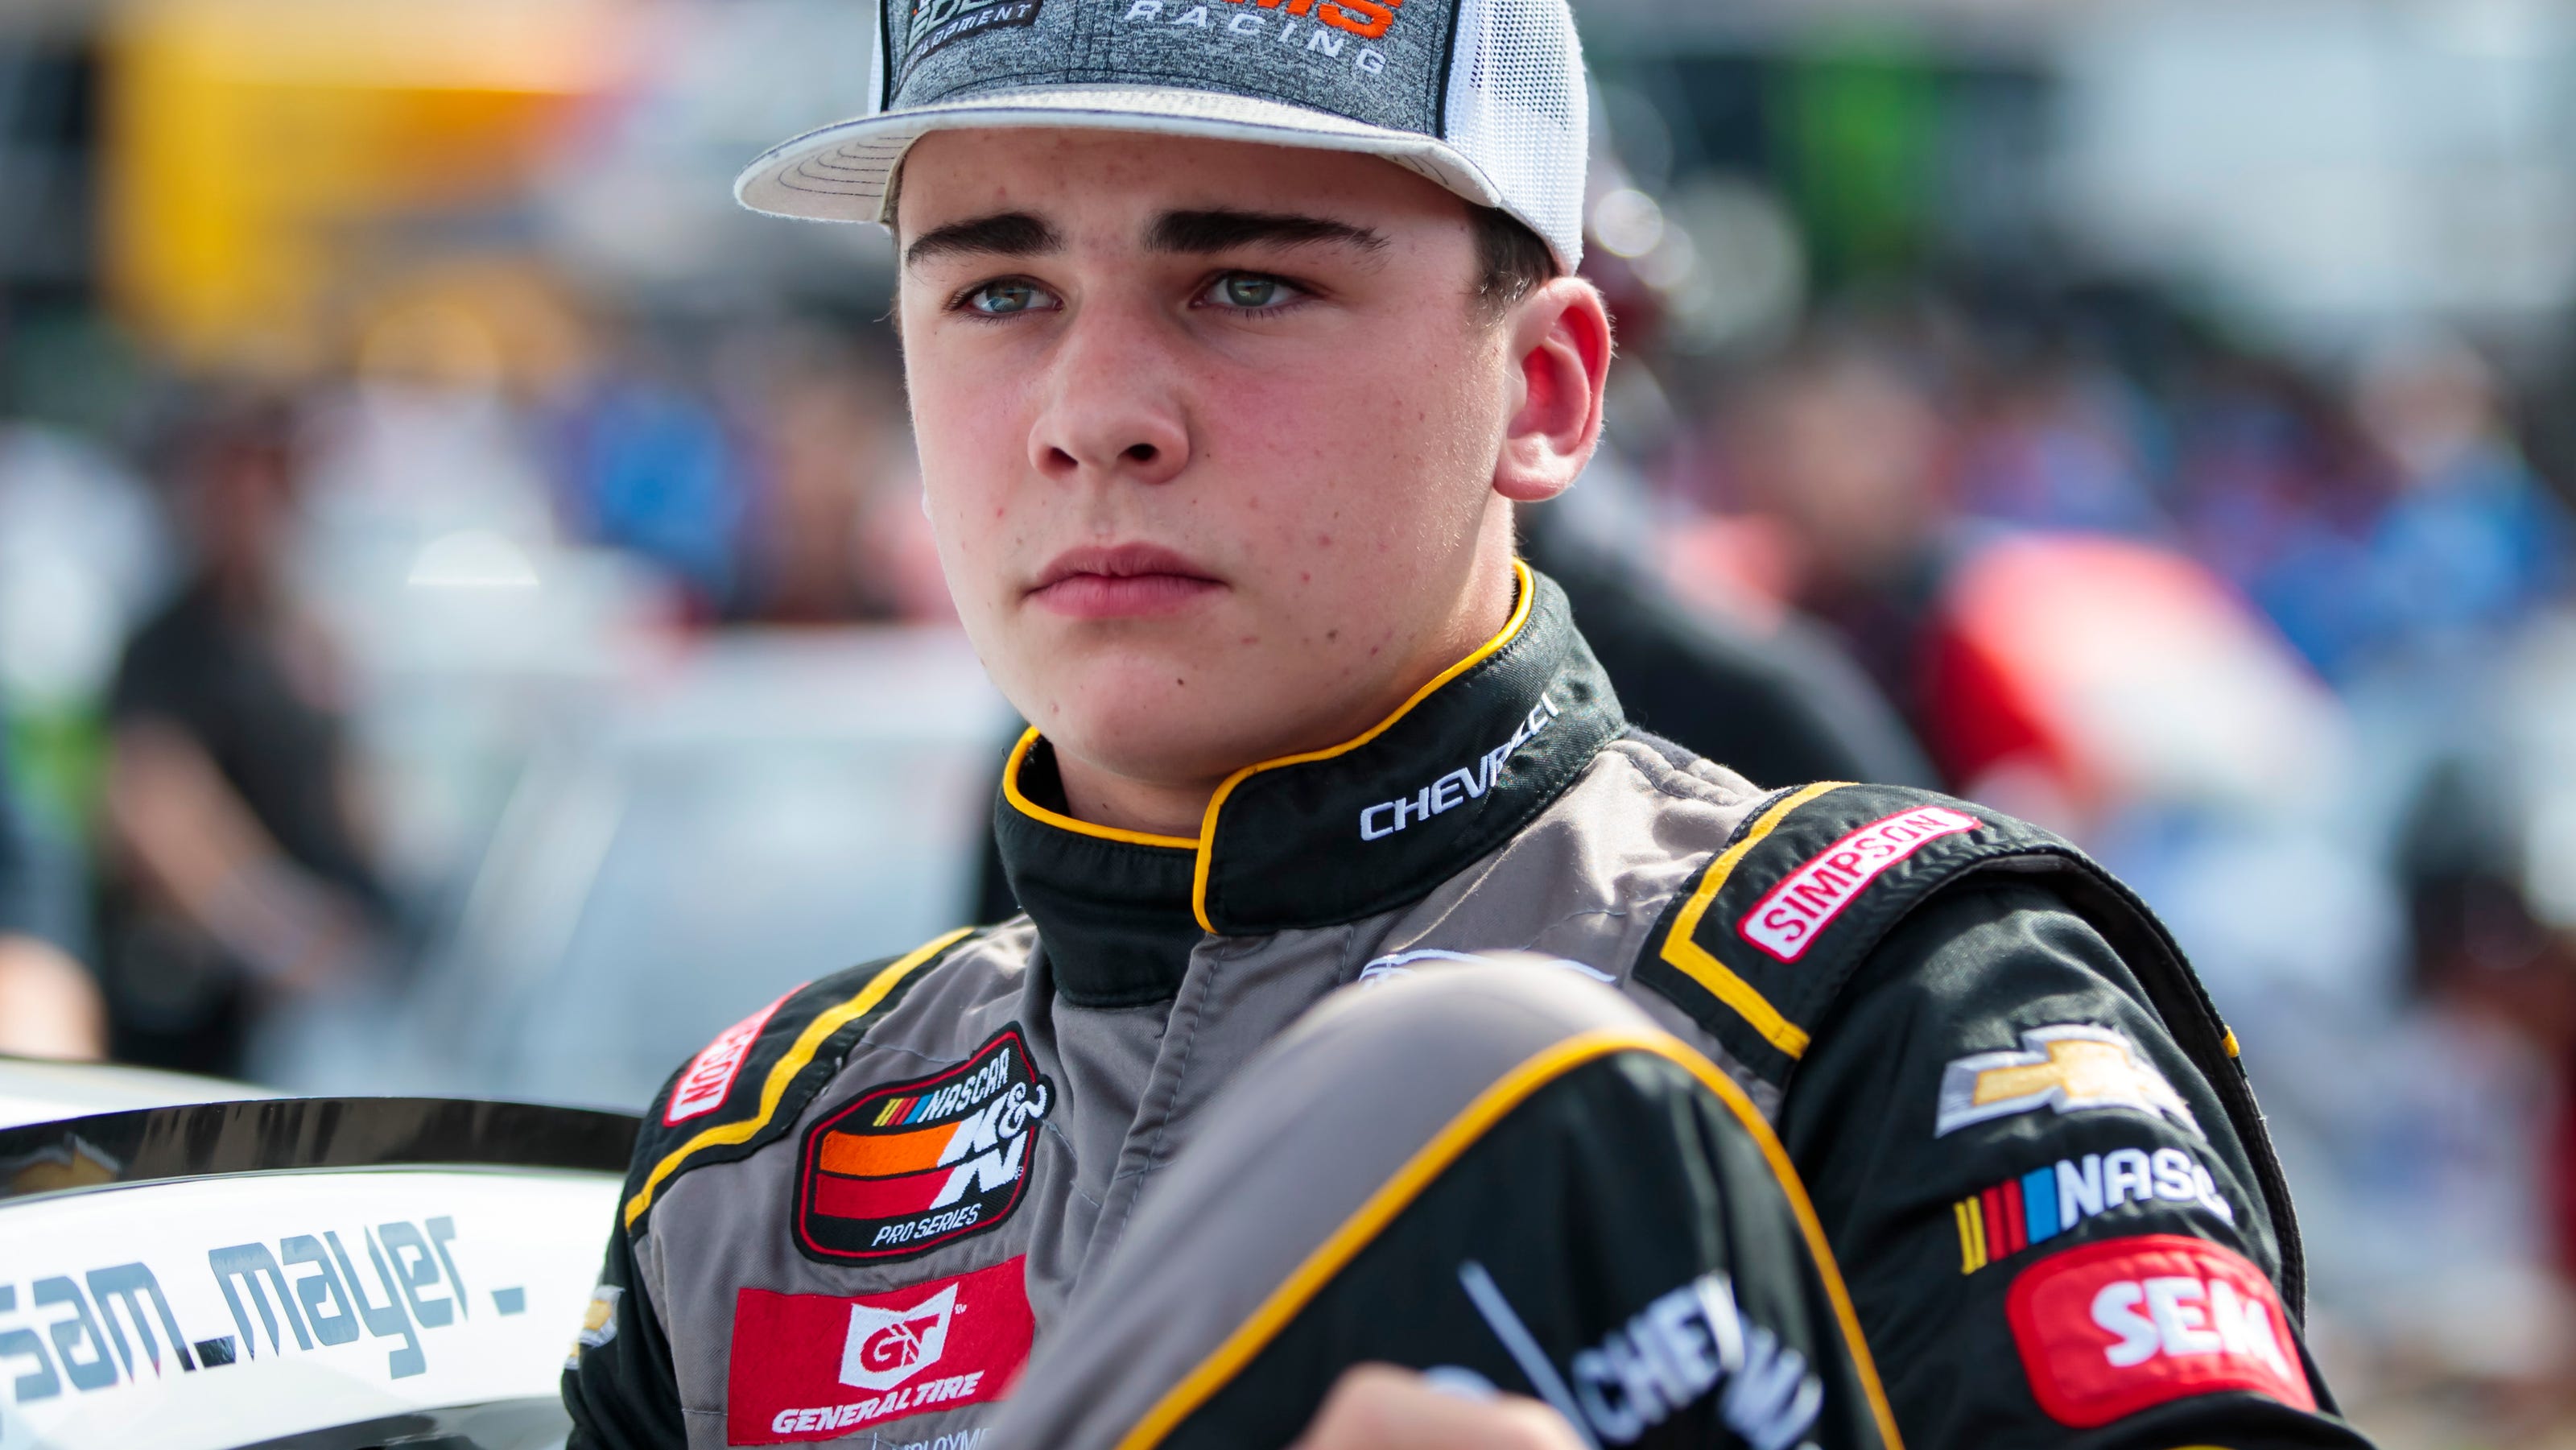 Wisconsin teen Sam Mayer on fast track to NASCAR success